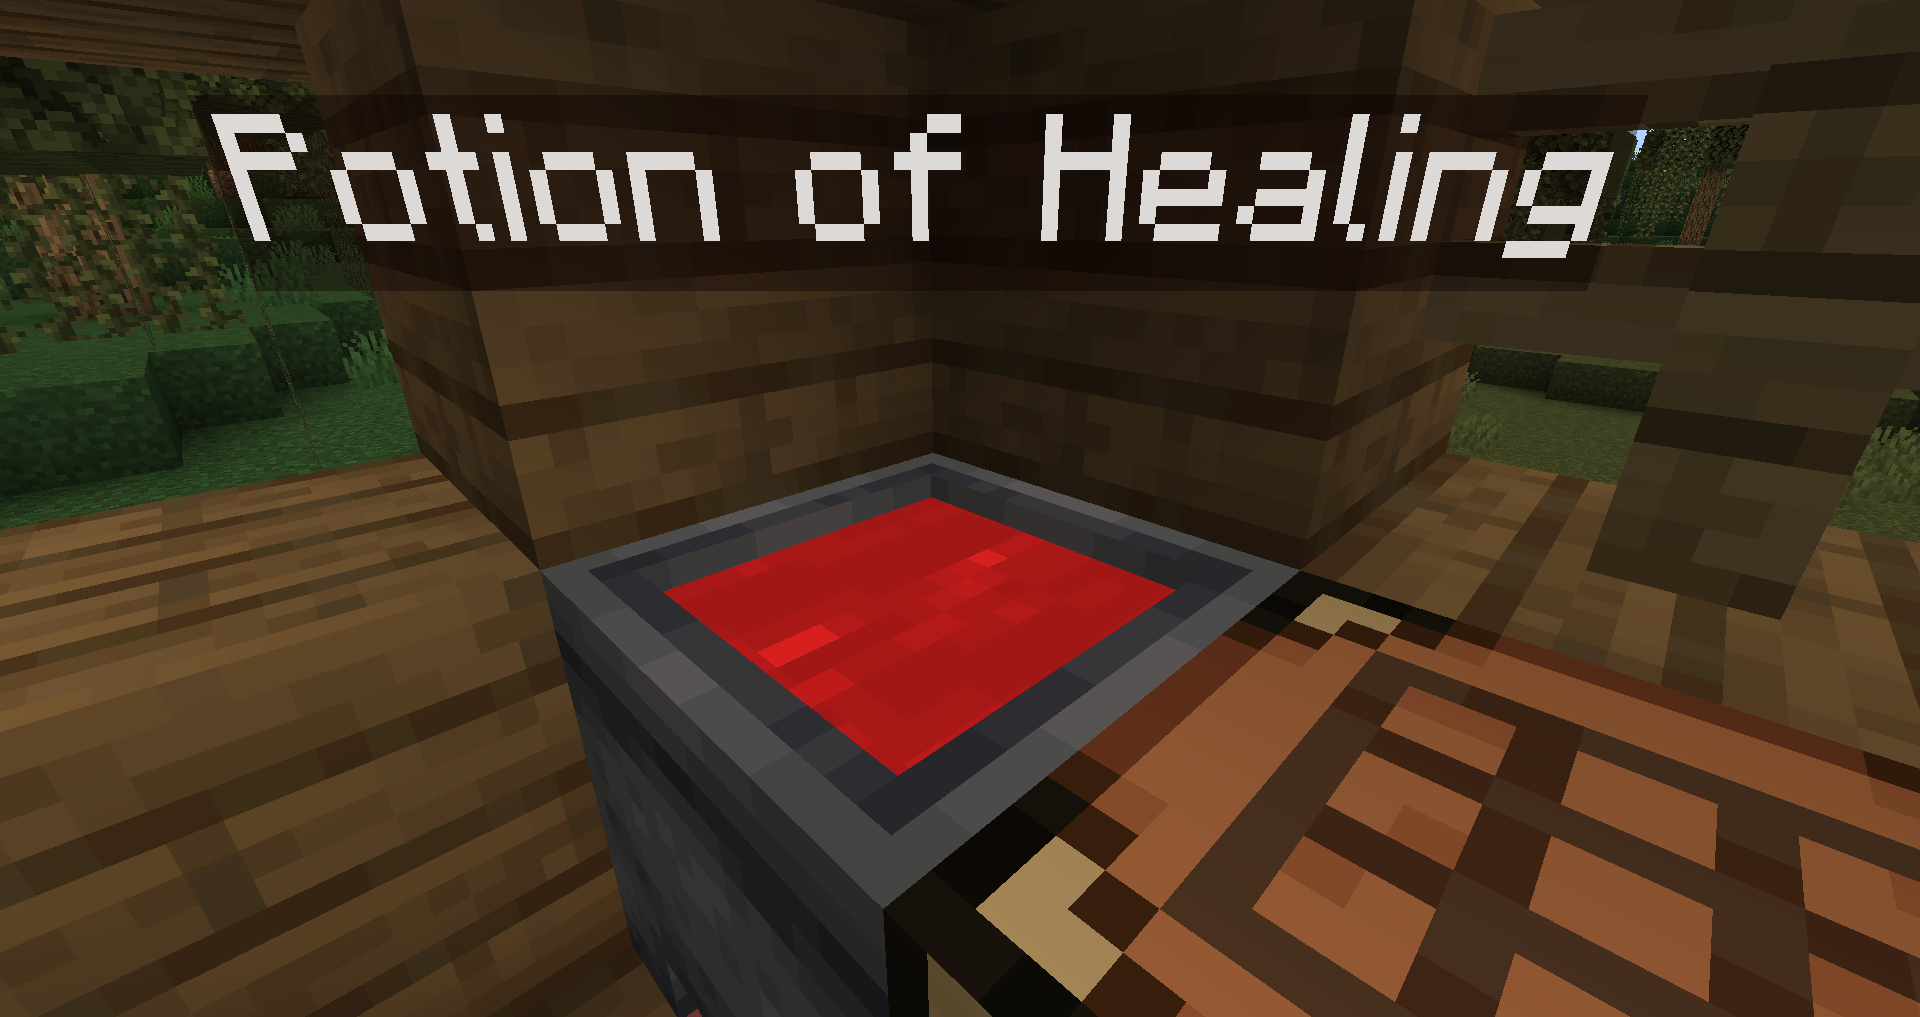 A Cauldron in a witches hut containing a strength potion.